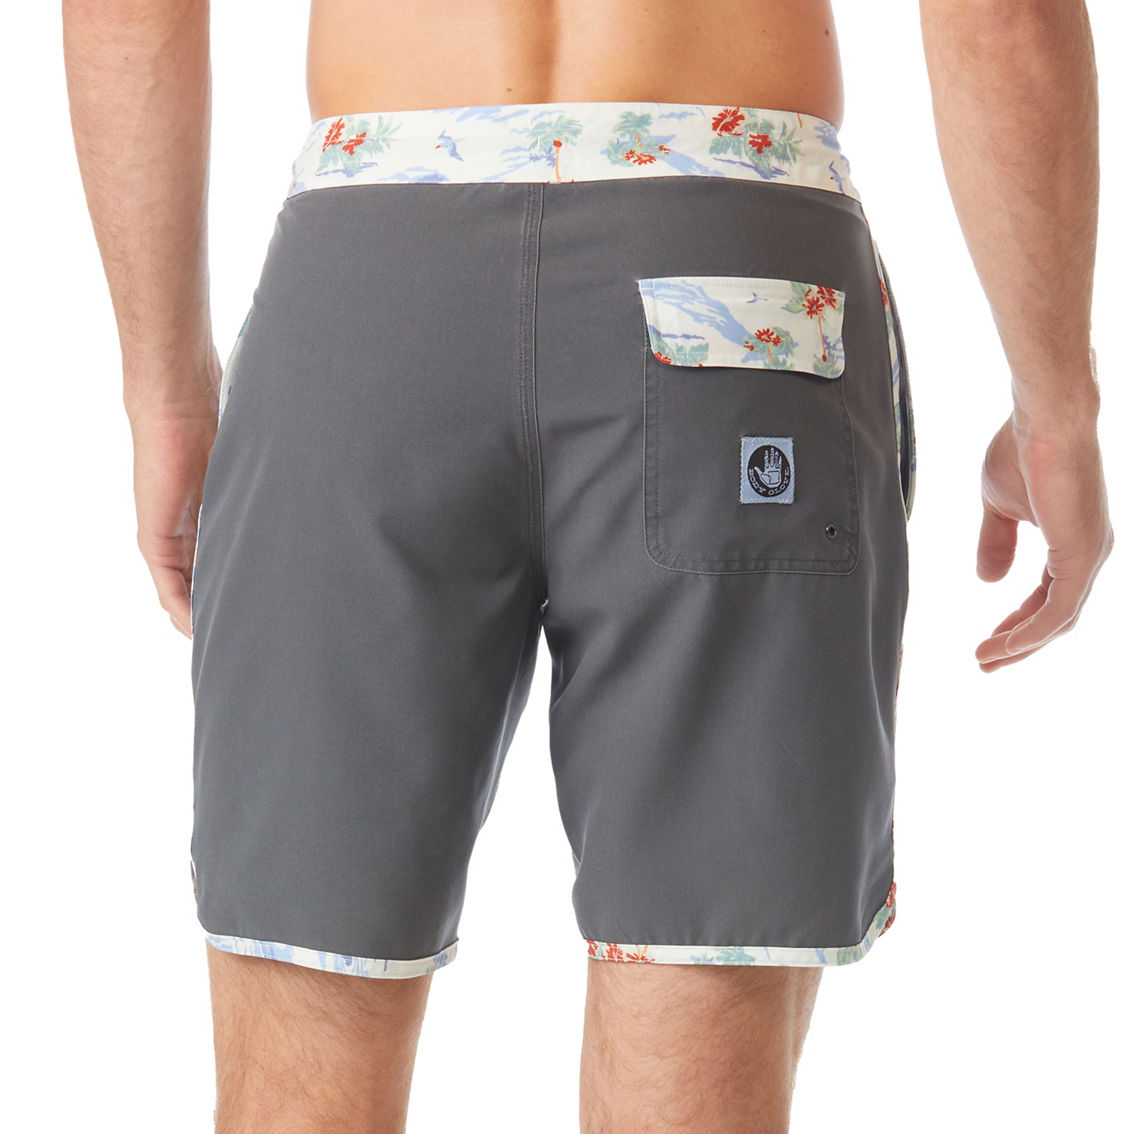 Body Glove Relaxed Fit Swim Scallop Board Shorts - Image 2 of 5